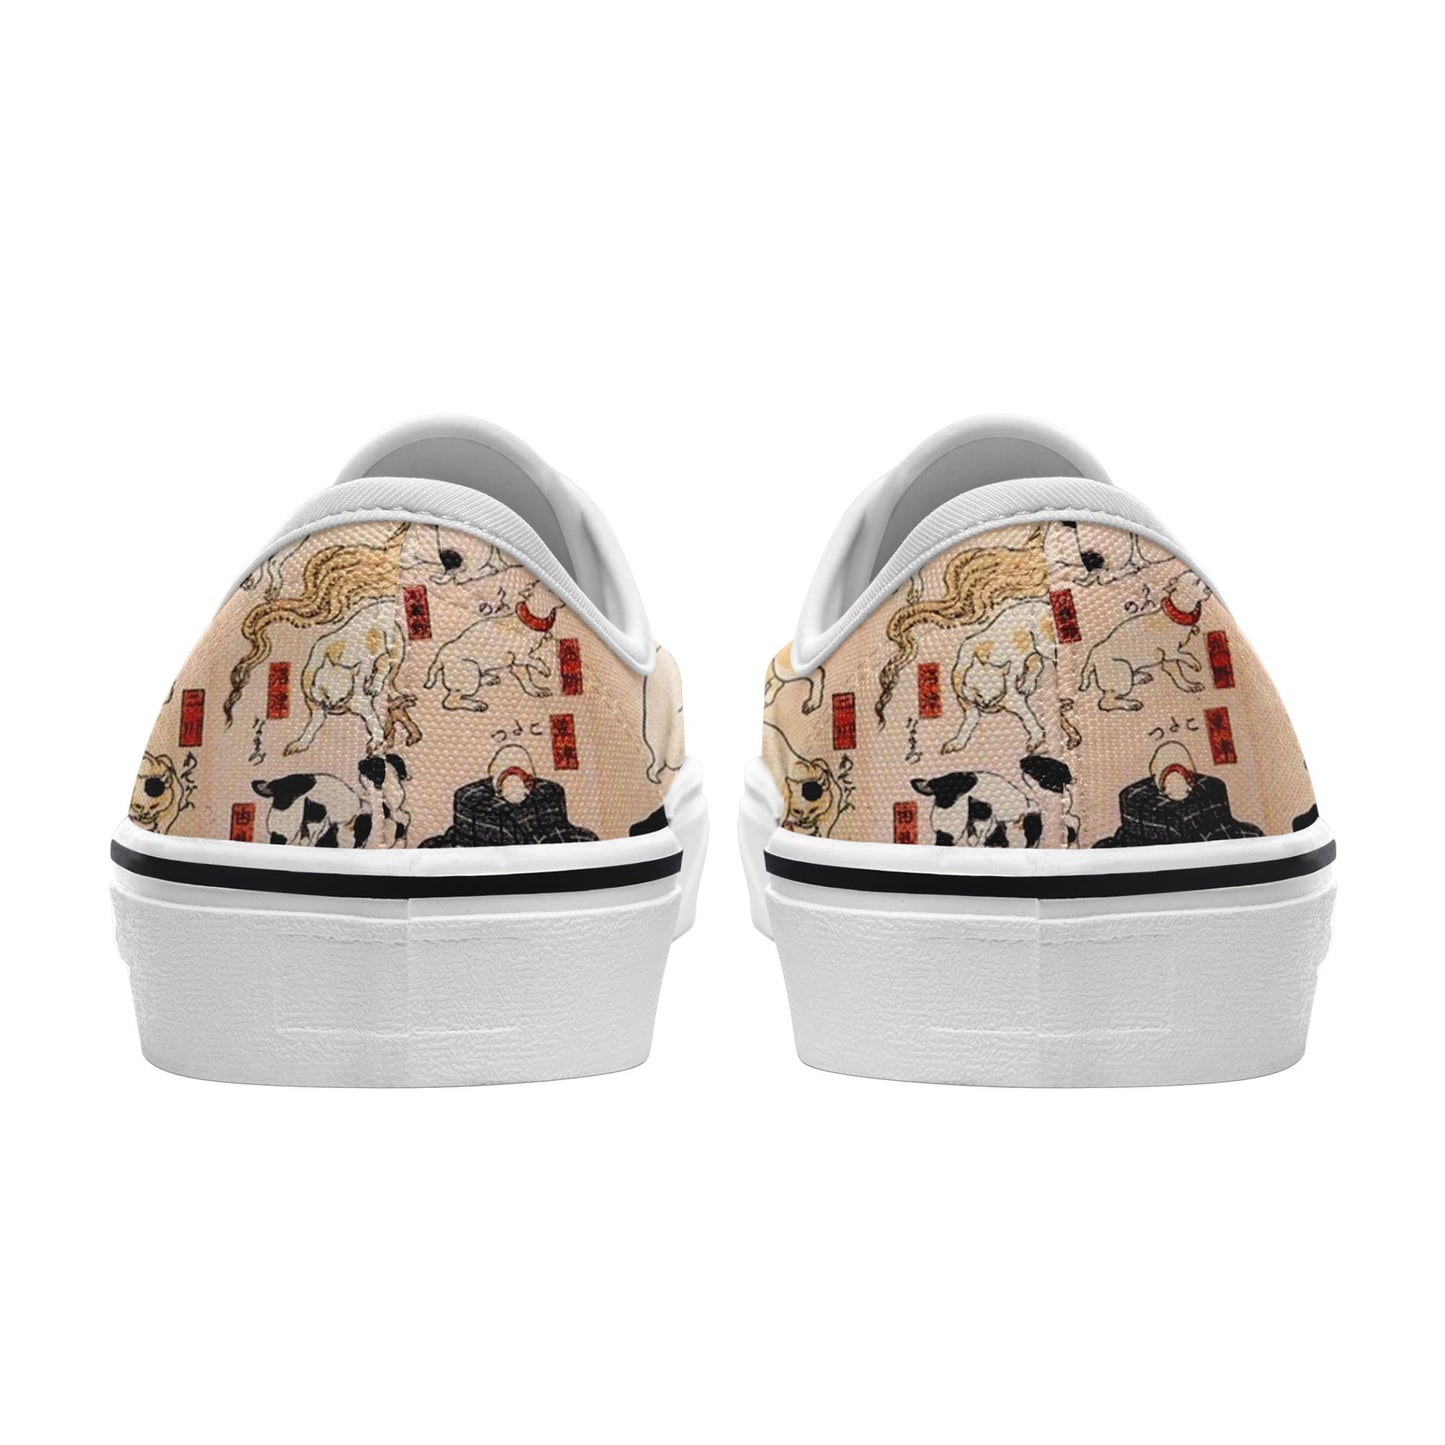 customize printed casual shoes 7213 with retro art ukiyo-e kuniyoshi utagawa's cats suggested as the fifty three stations of the tokaido sneakers white soles 5